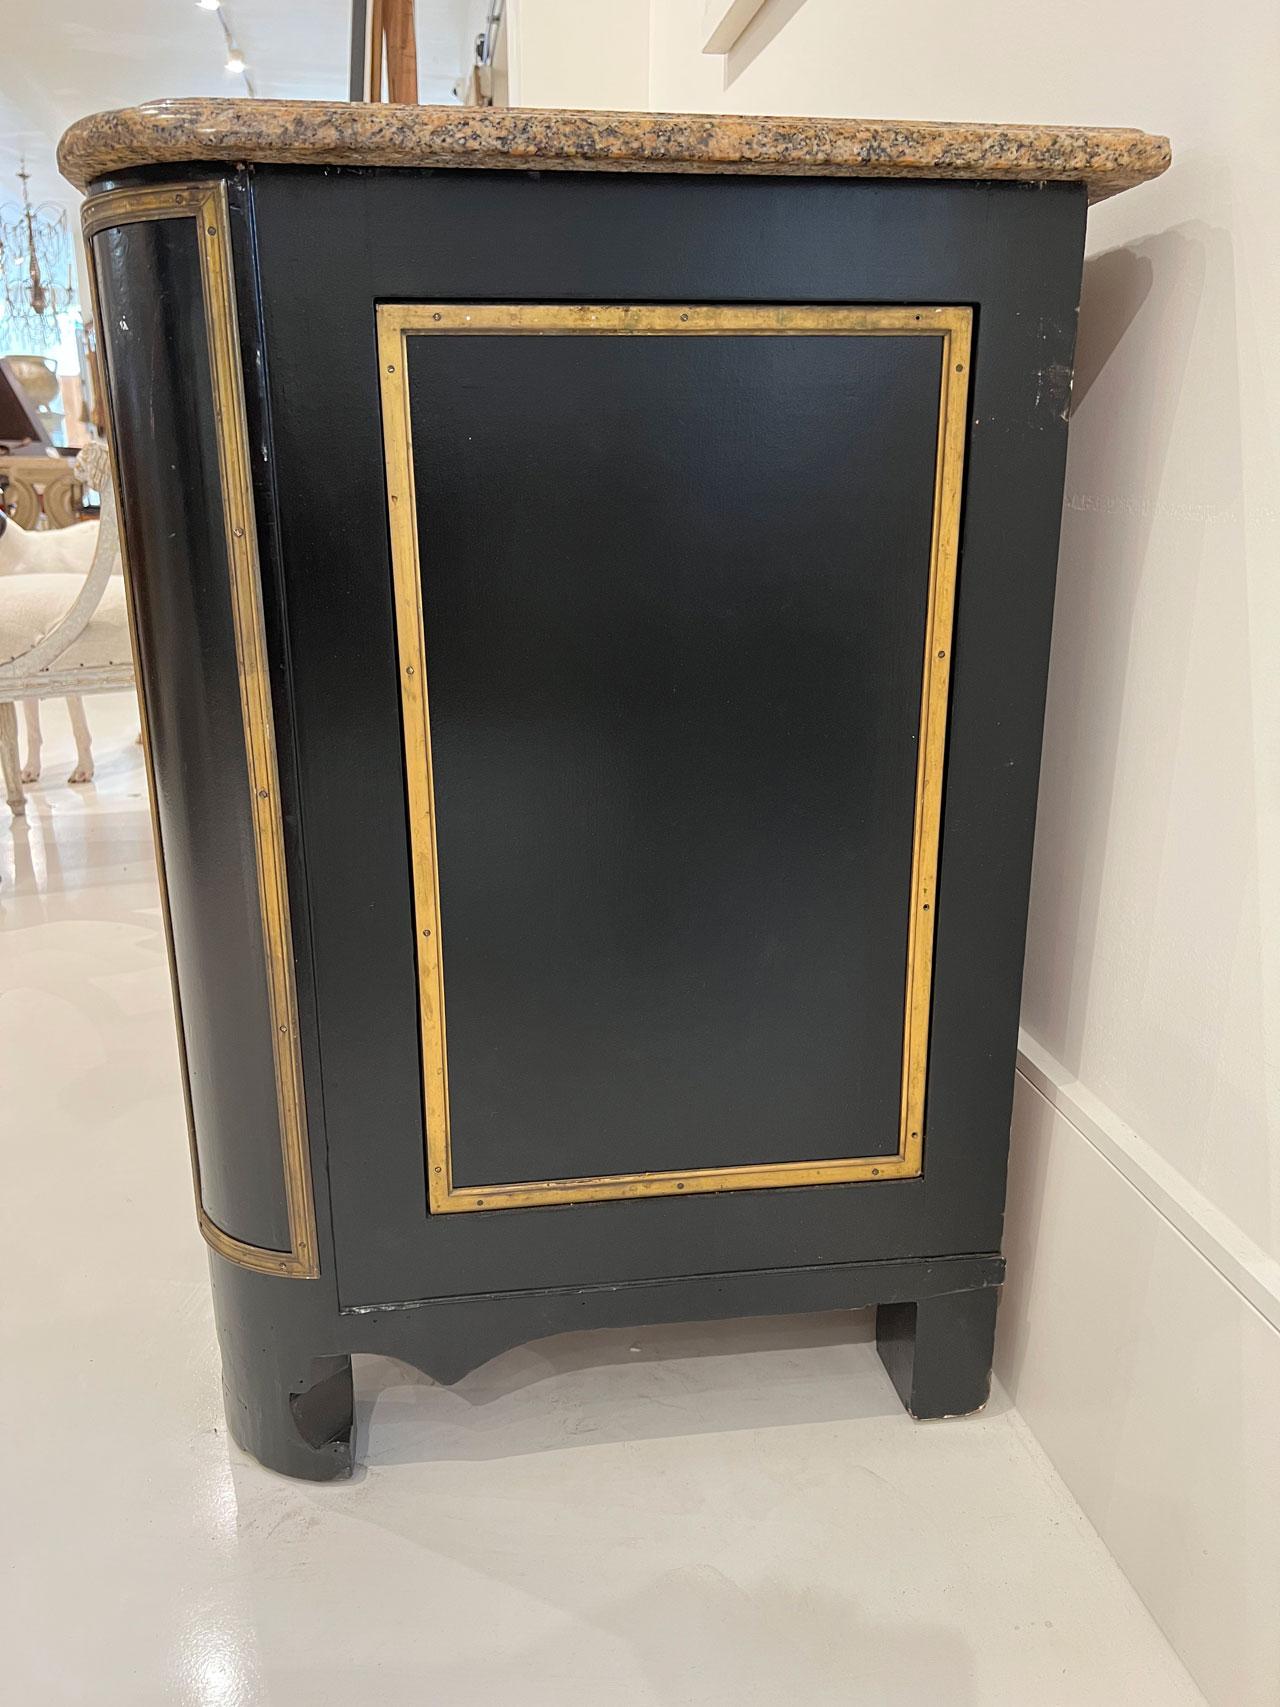 This vintage noir three drawer commode is accented with gold paint and elaborate bronze pulls and escutcheon. A beautiful marble with ogee edge tops this fine piece. Curved apron enhances the appeal to have this showpiece in your space.